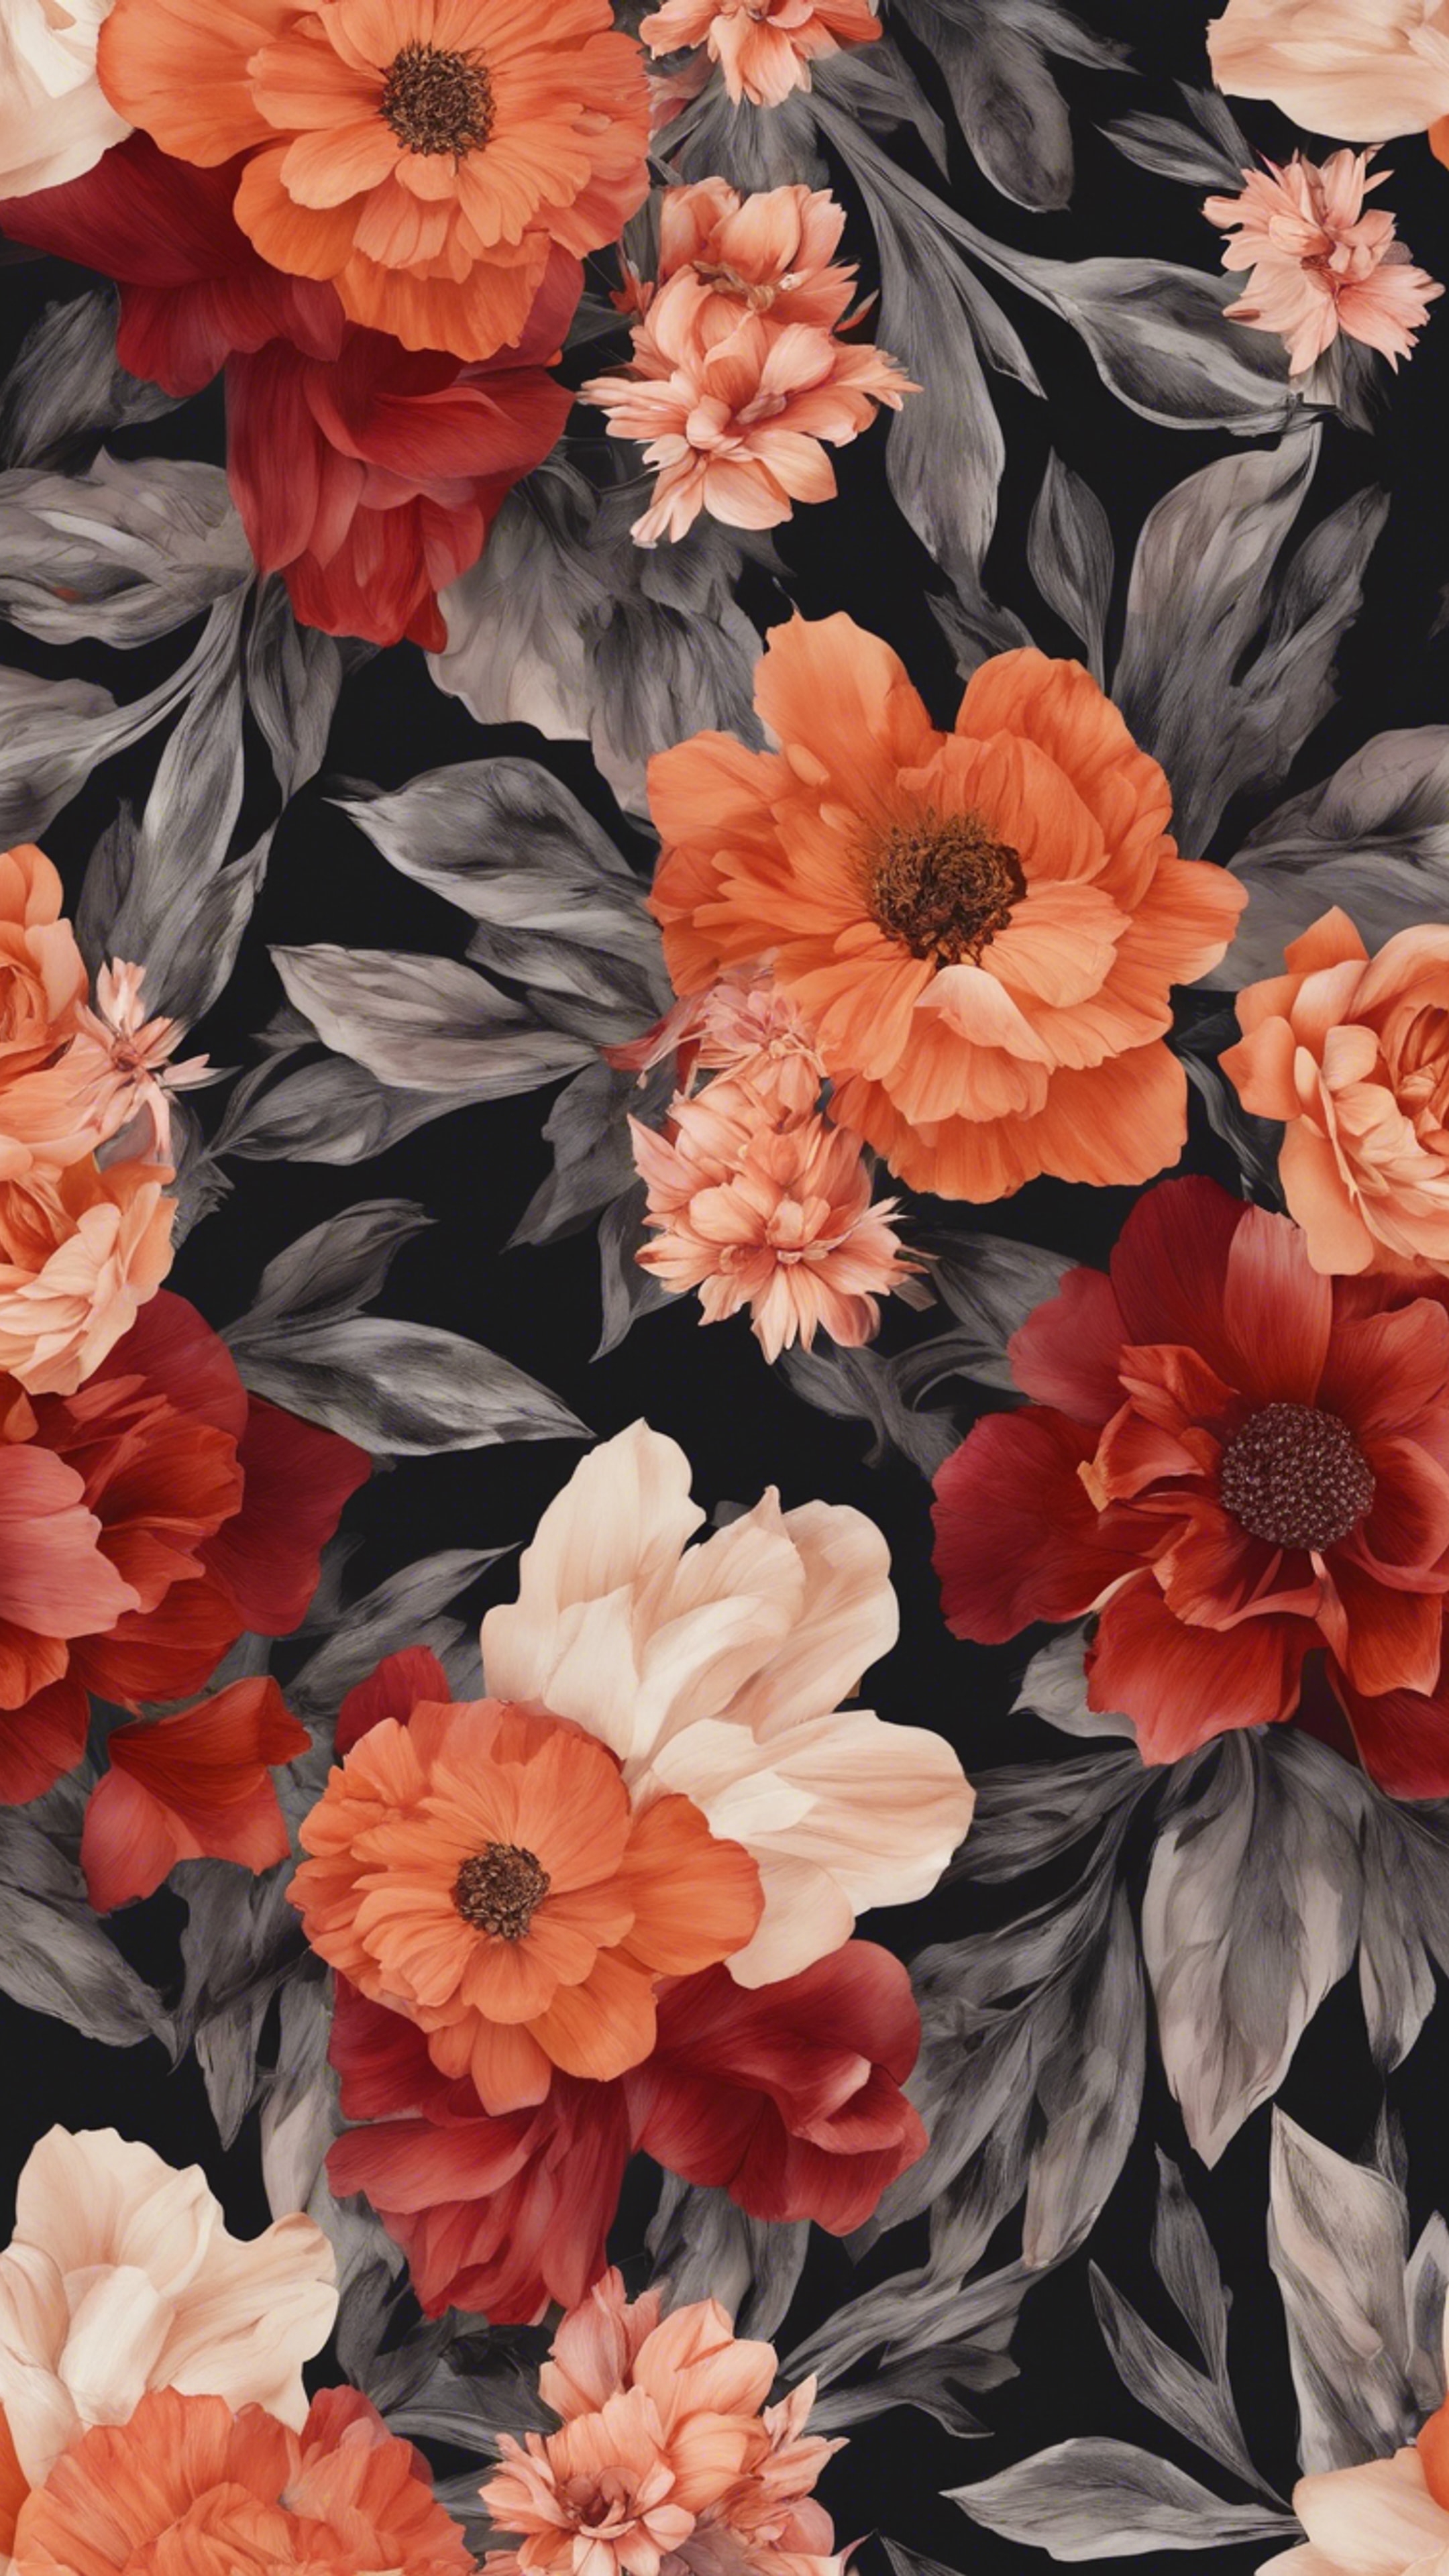 Seamless floral pattern with red and orange flowers that have a gradient effect. Шпалери[2b8b1301f068420e9b5a]